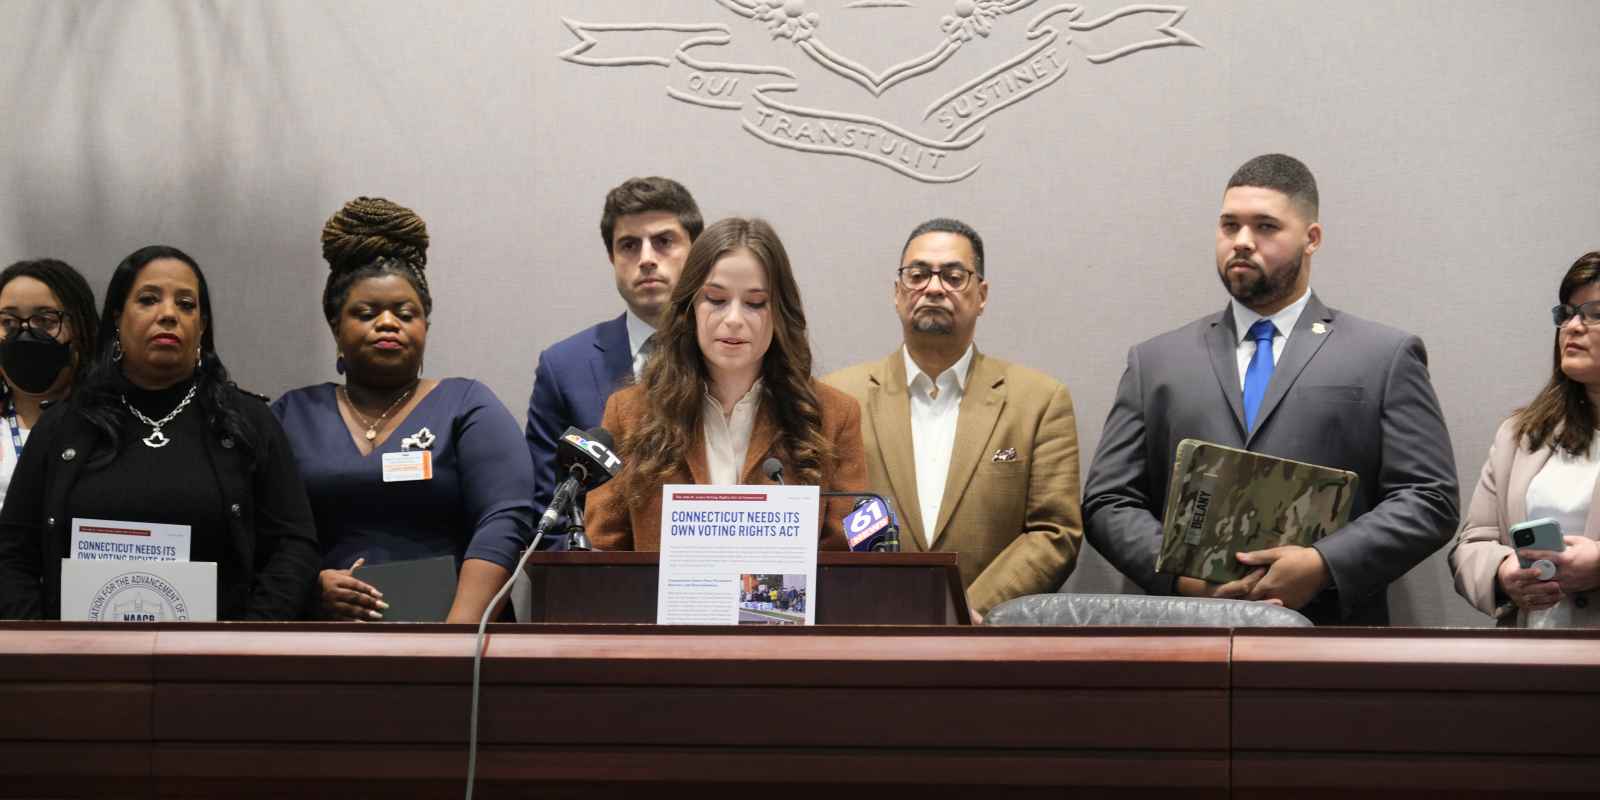 Jess Zaccagnino, a woman with long brown hair, stands behind a podium. In front of her is a sign that says "CT voting rights act." Behind her is a group of people, watching as she speaks